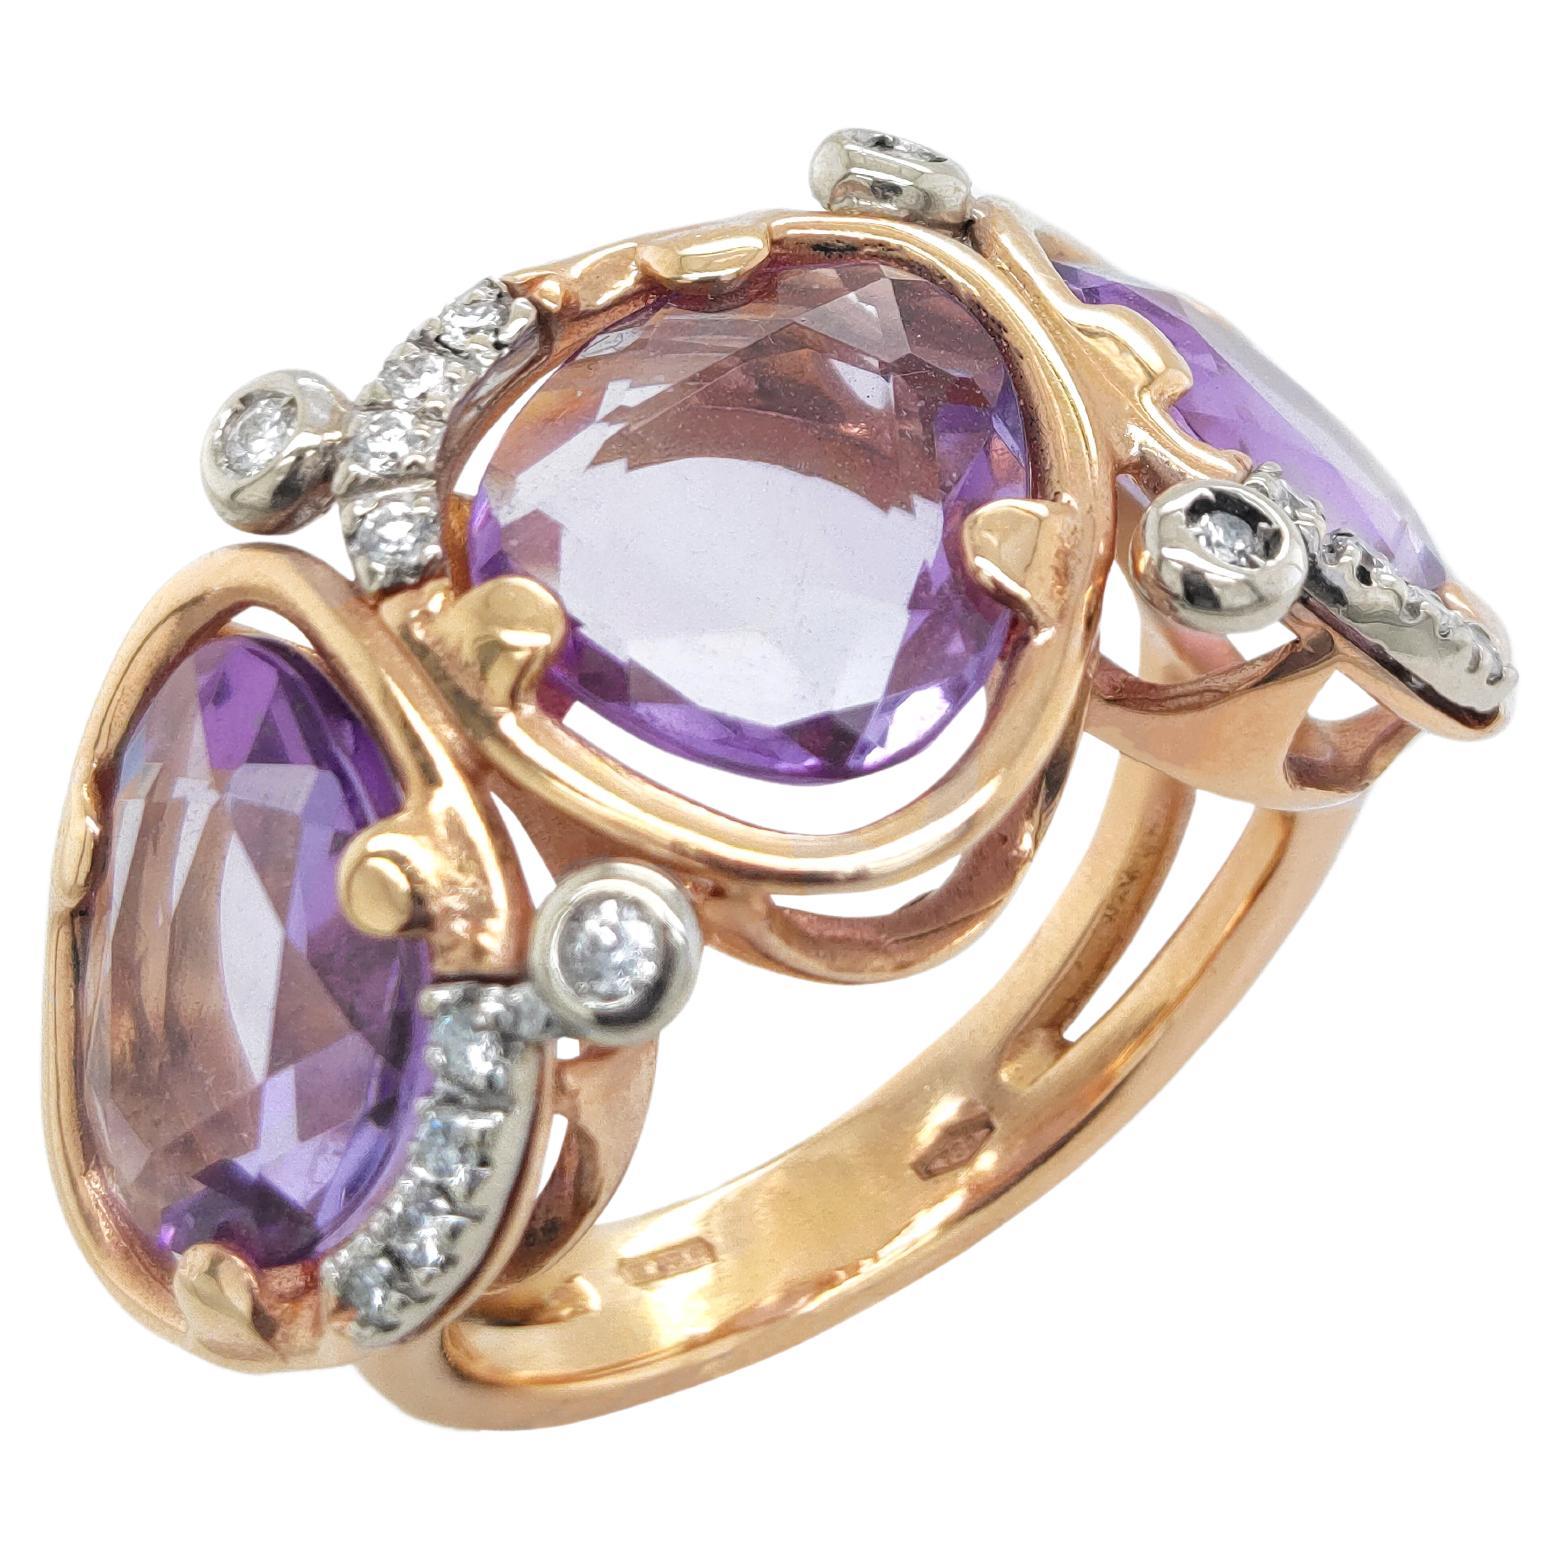 18 kt rose gold Dharma Ring with 3 faceted amethysts & diamonds